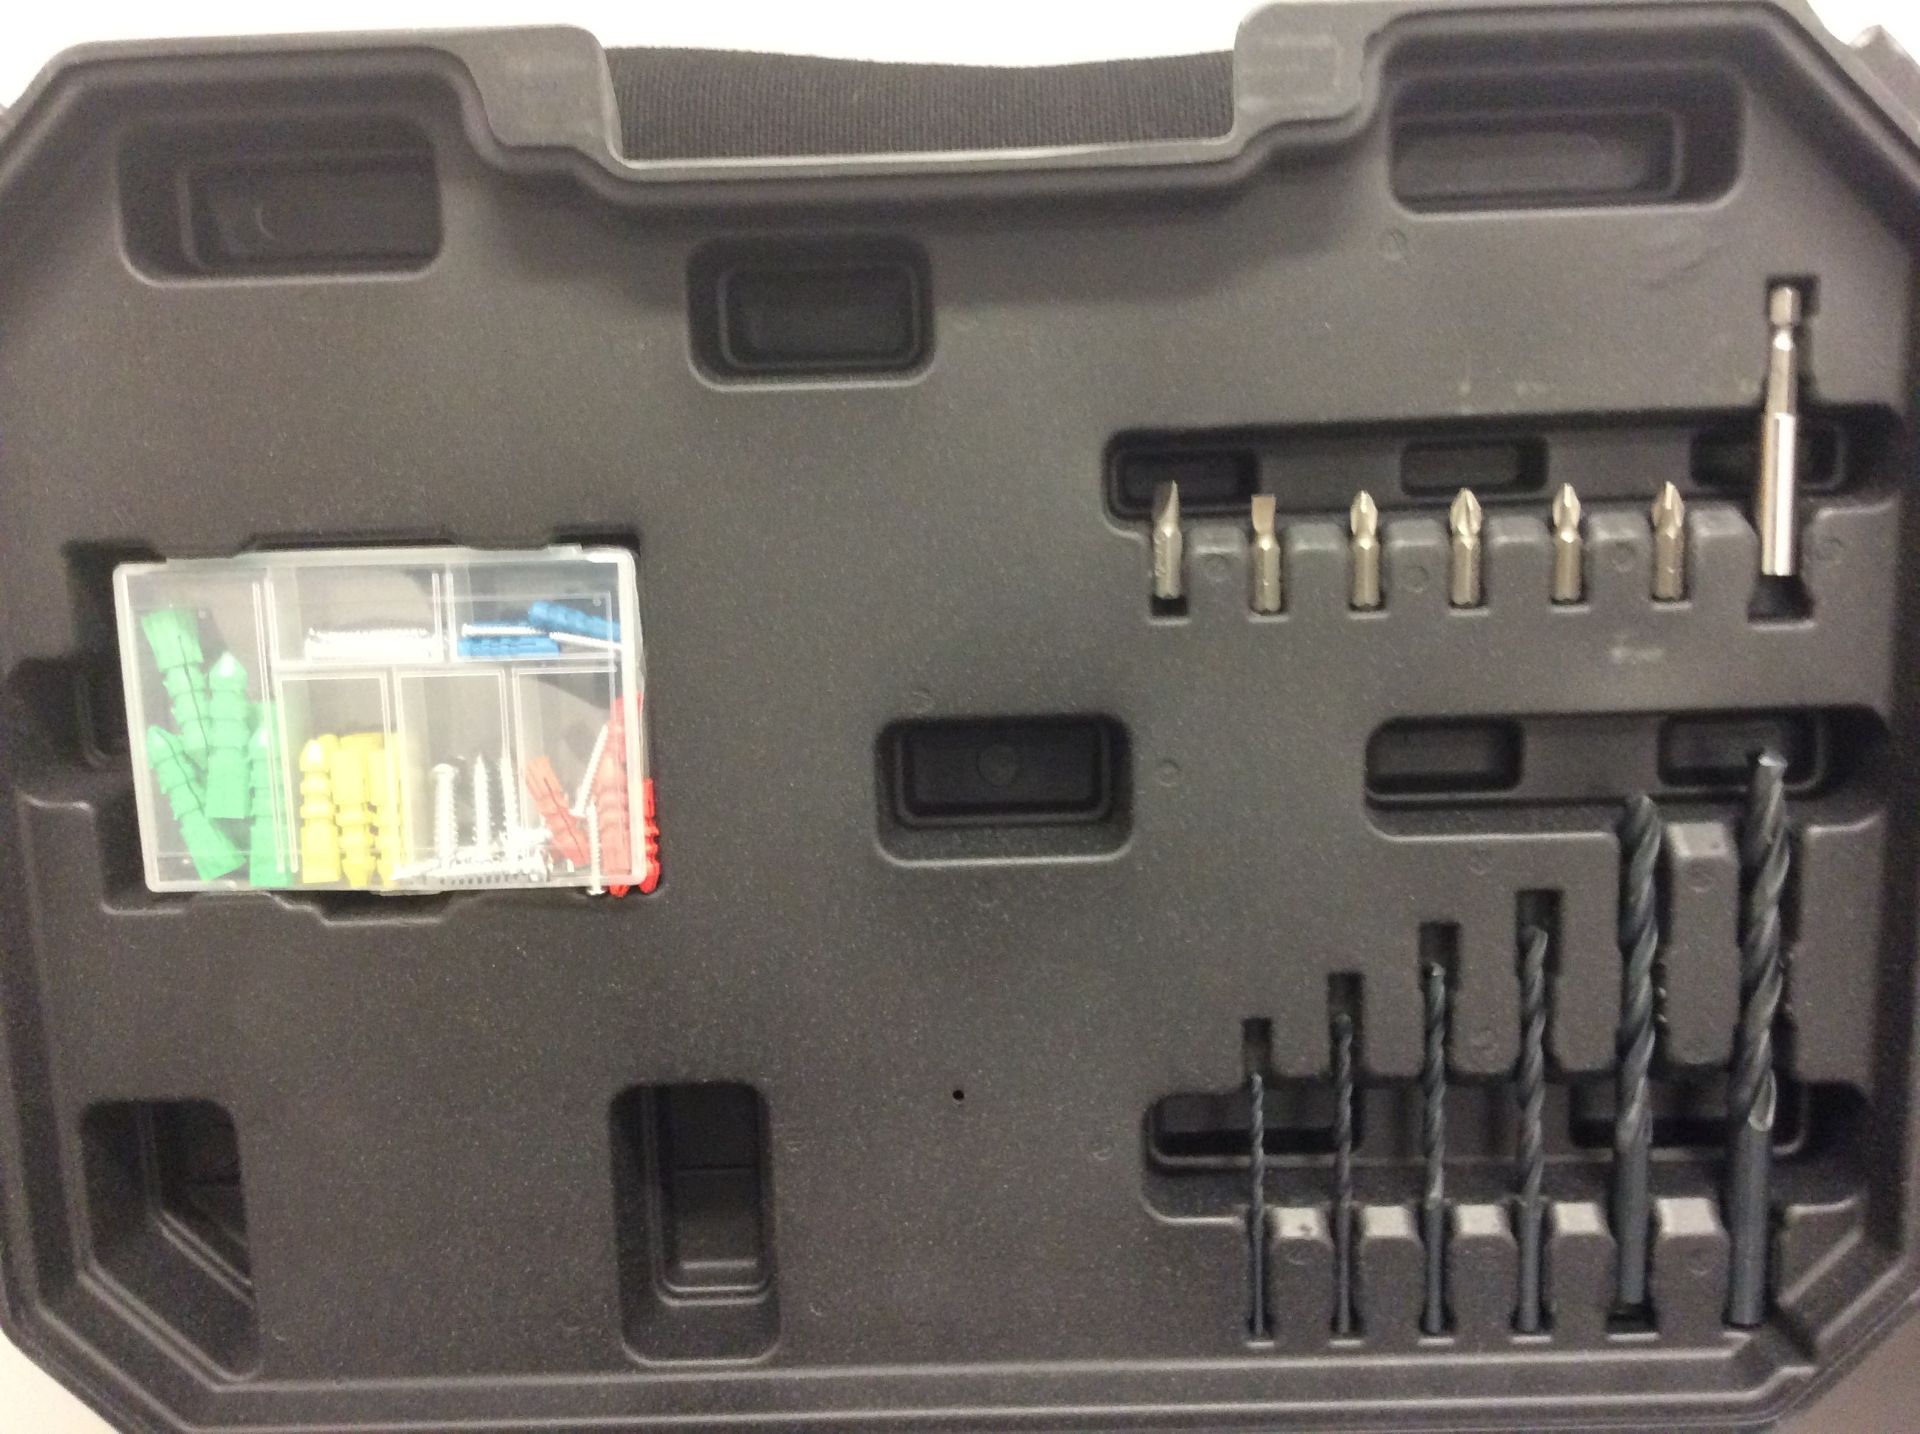 V Brand New 24 volt Twin Drill Set Lithium Ion Cordless In Carry Case With Keyless Chuck - Impact - Image 3 of 3